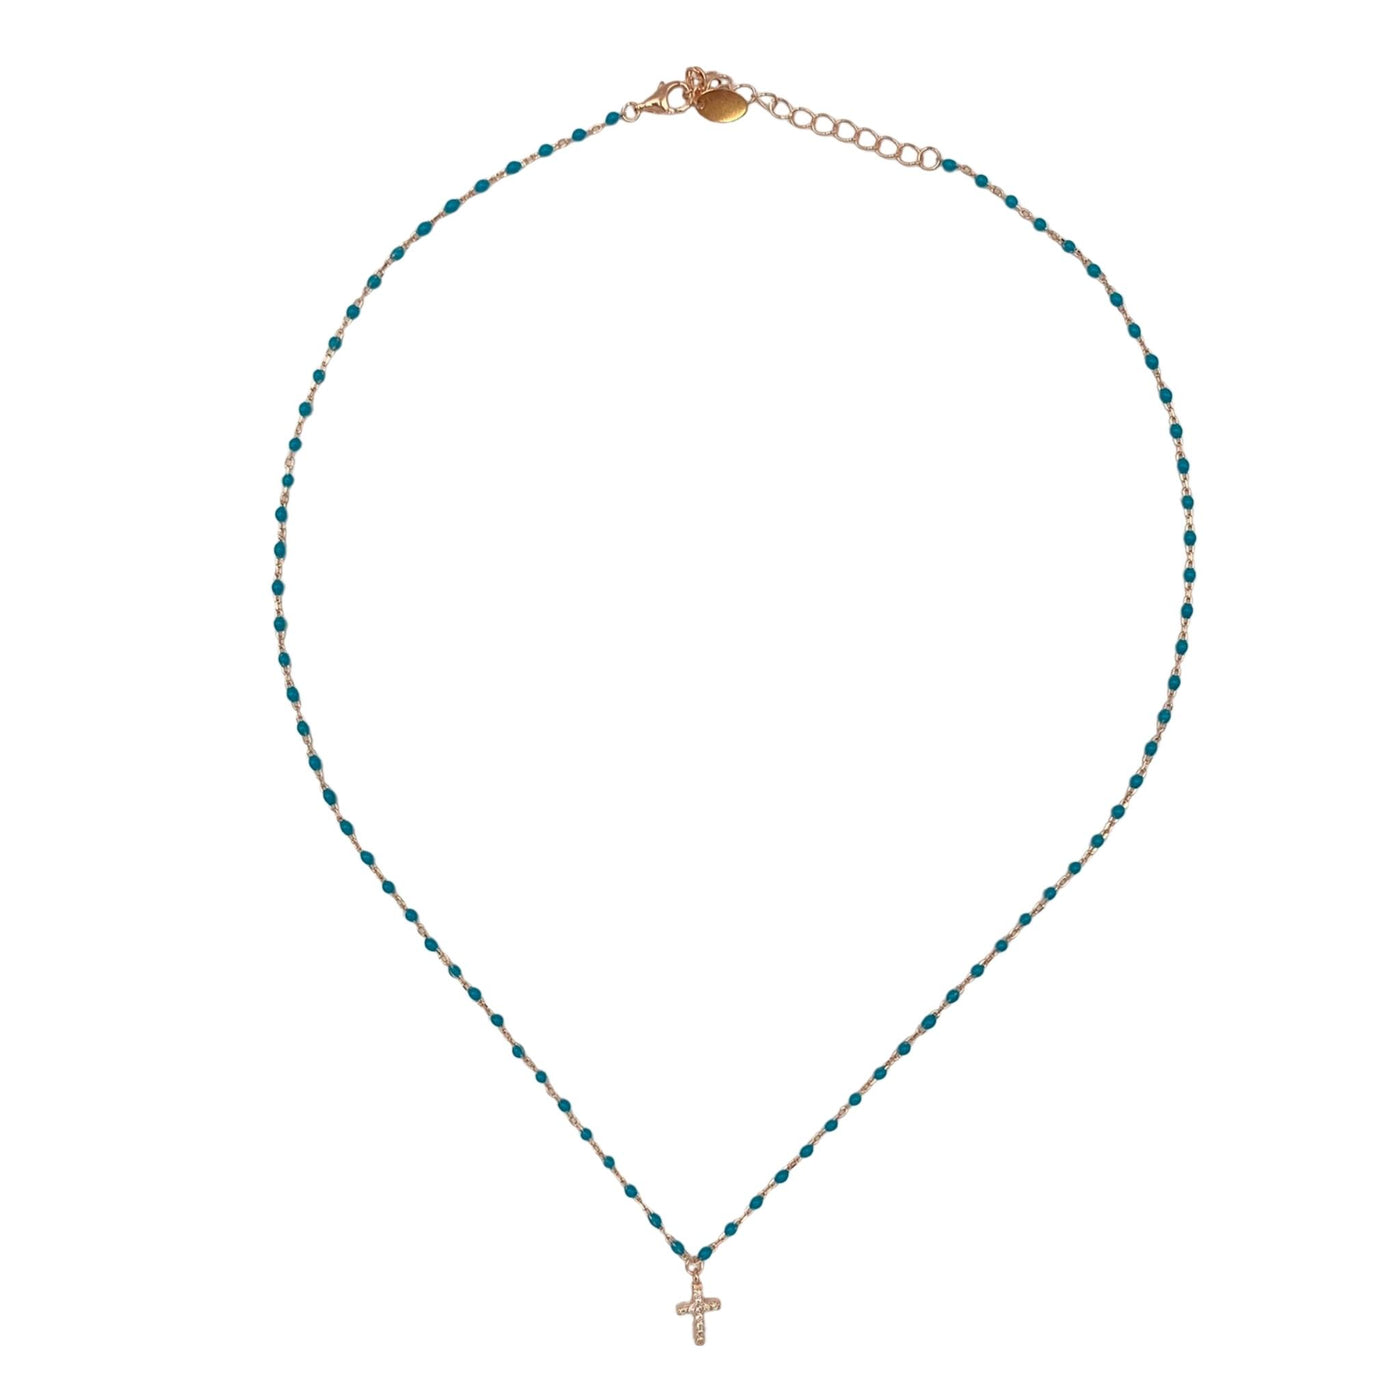 Silver enamel necklace with cross